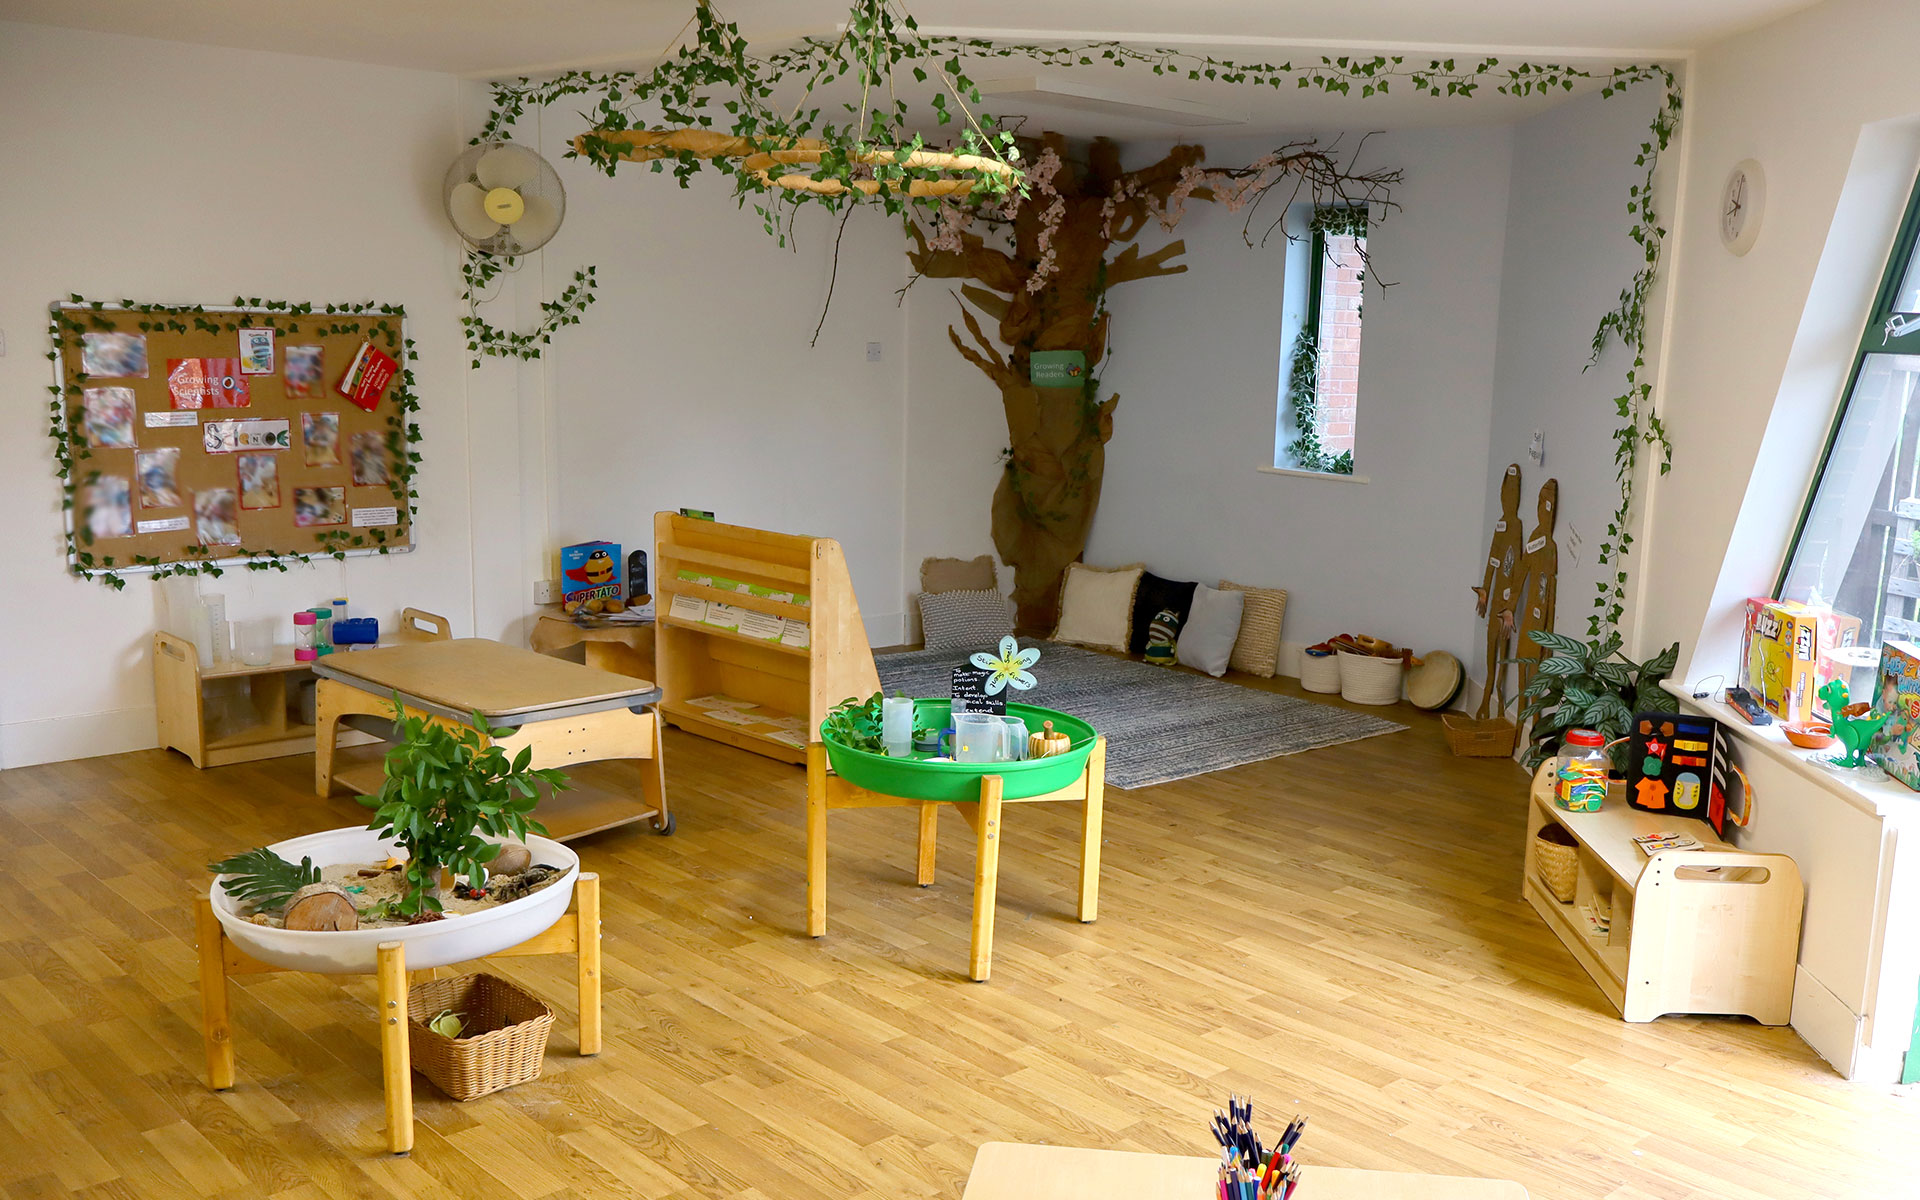 Countess of Chester Day Nursery and Preschool nursery room with reading corner